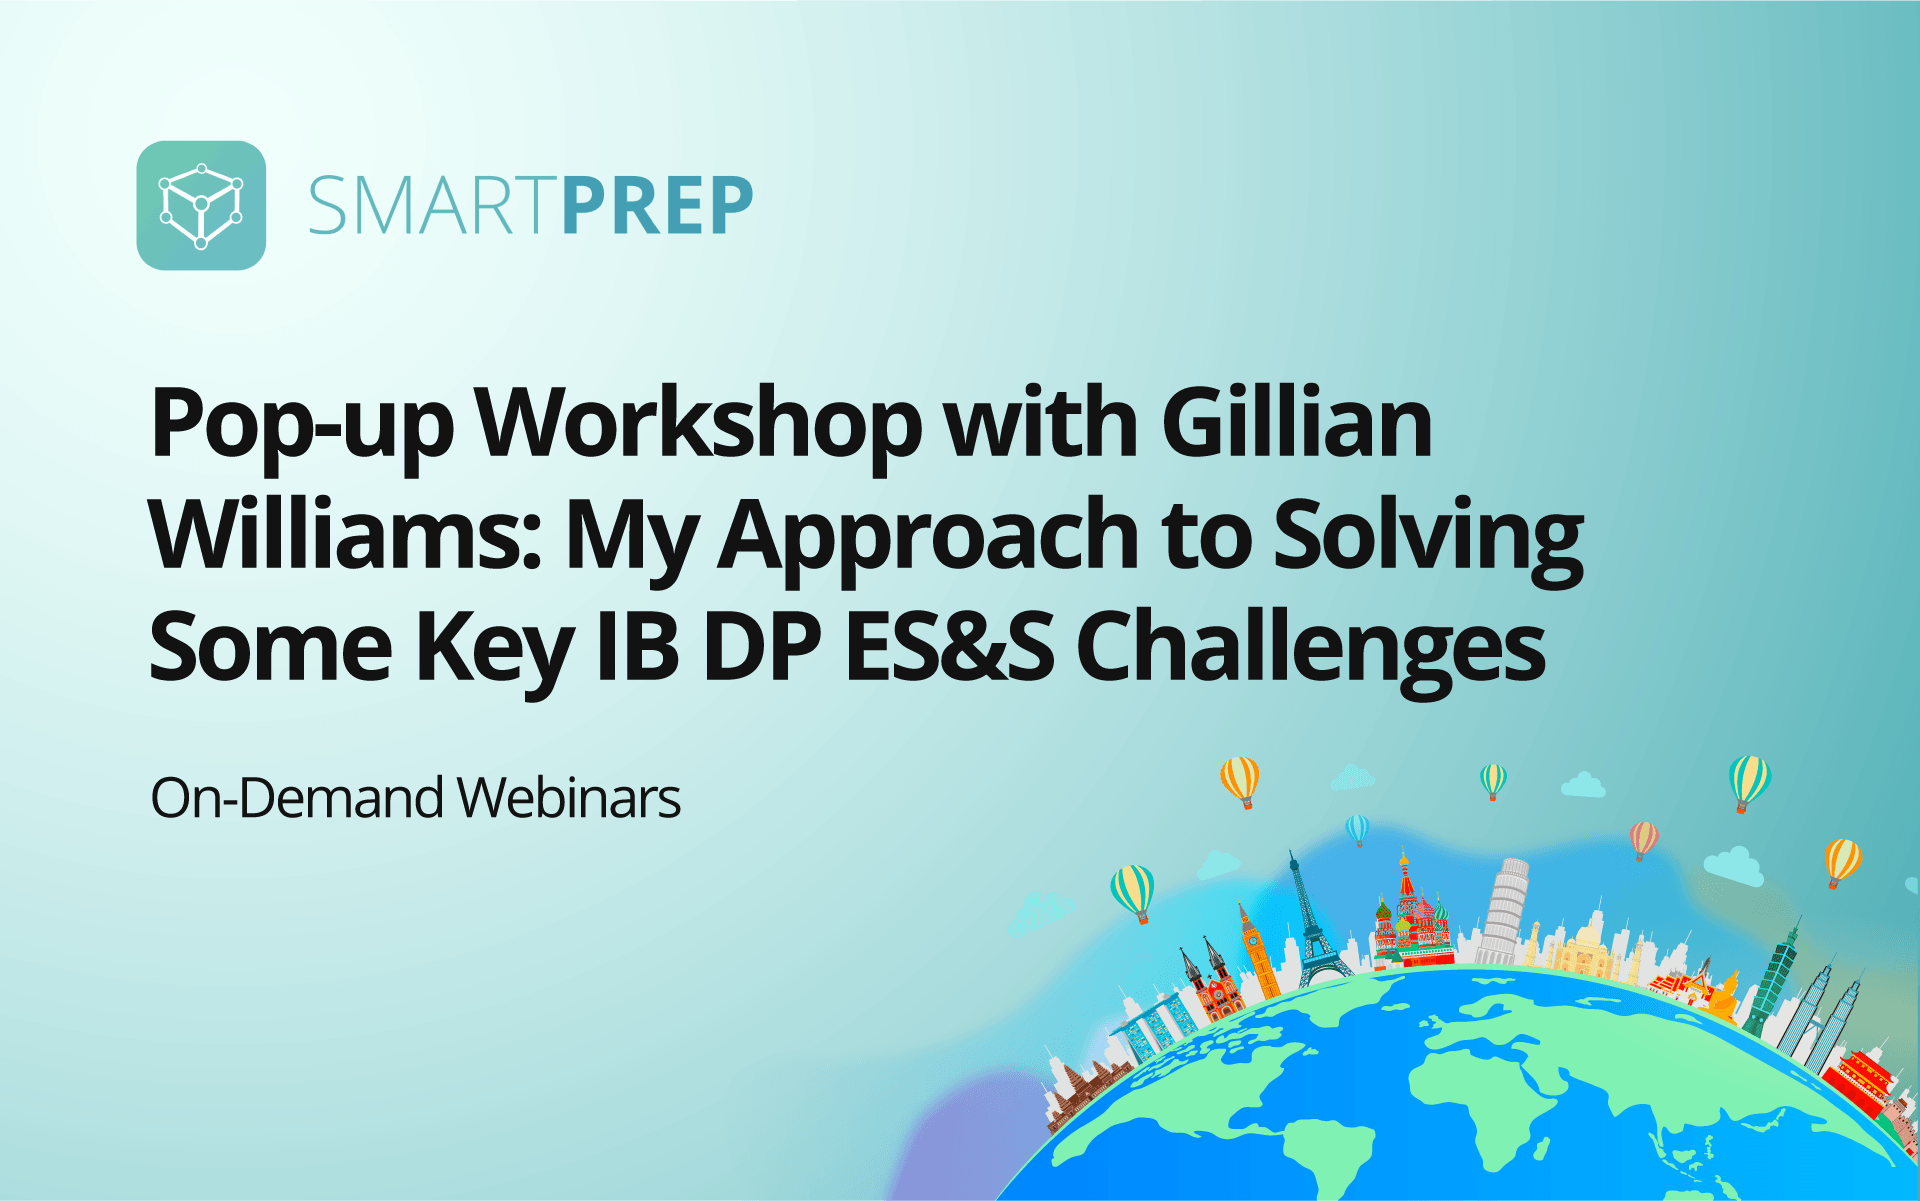 Pop-up workshop with Gillian Williams: My approach to solving some key IB DP ES&S challenges